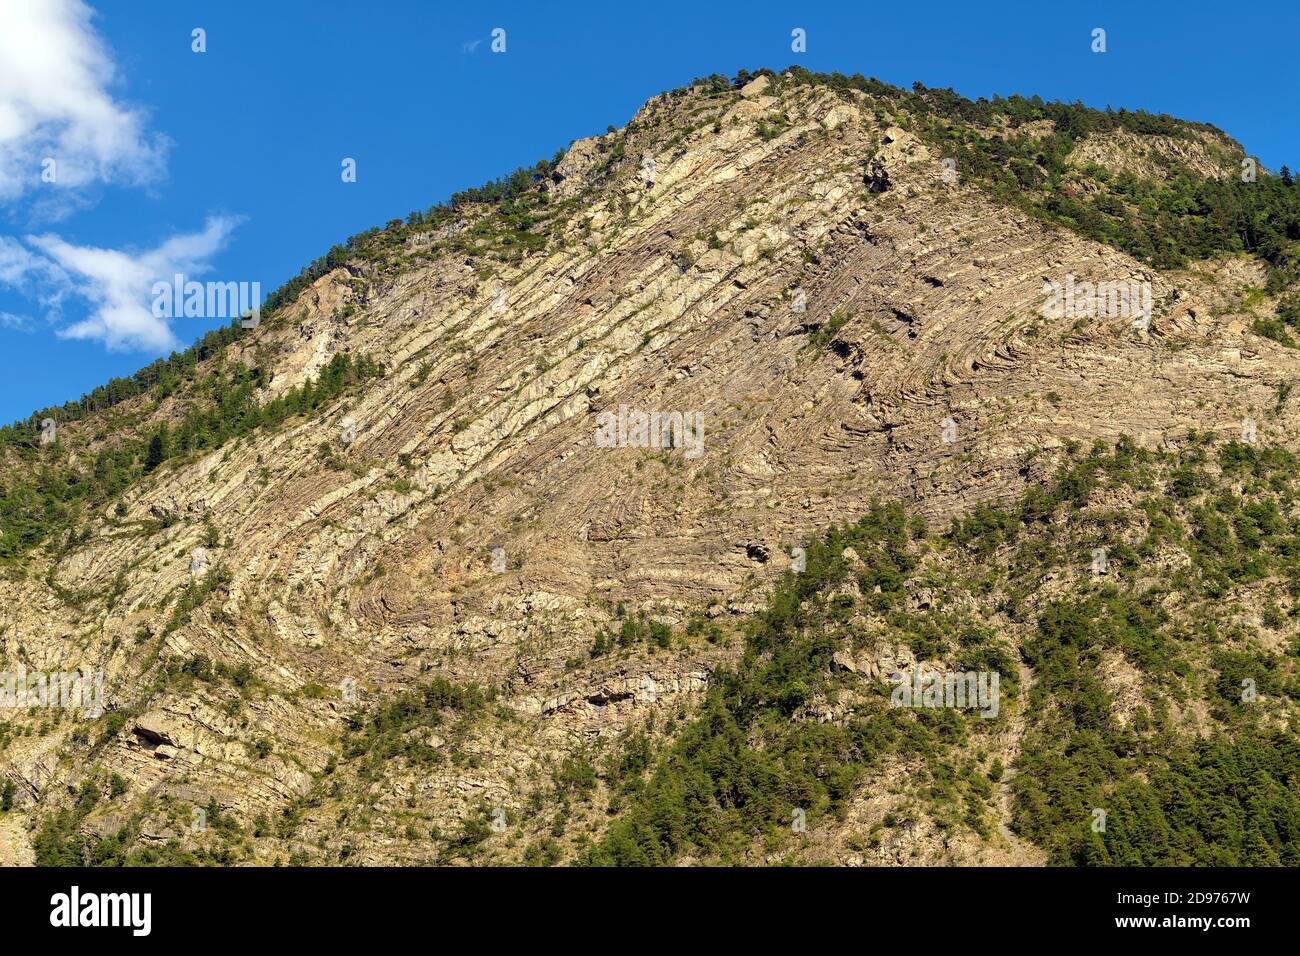 Lying anticline of Saint Clement, Famous synclinal hinge, drawn by layers of flysch to Helminthoides, Durance Valley, Hautes Alpes, France Stock Photo